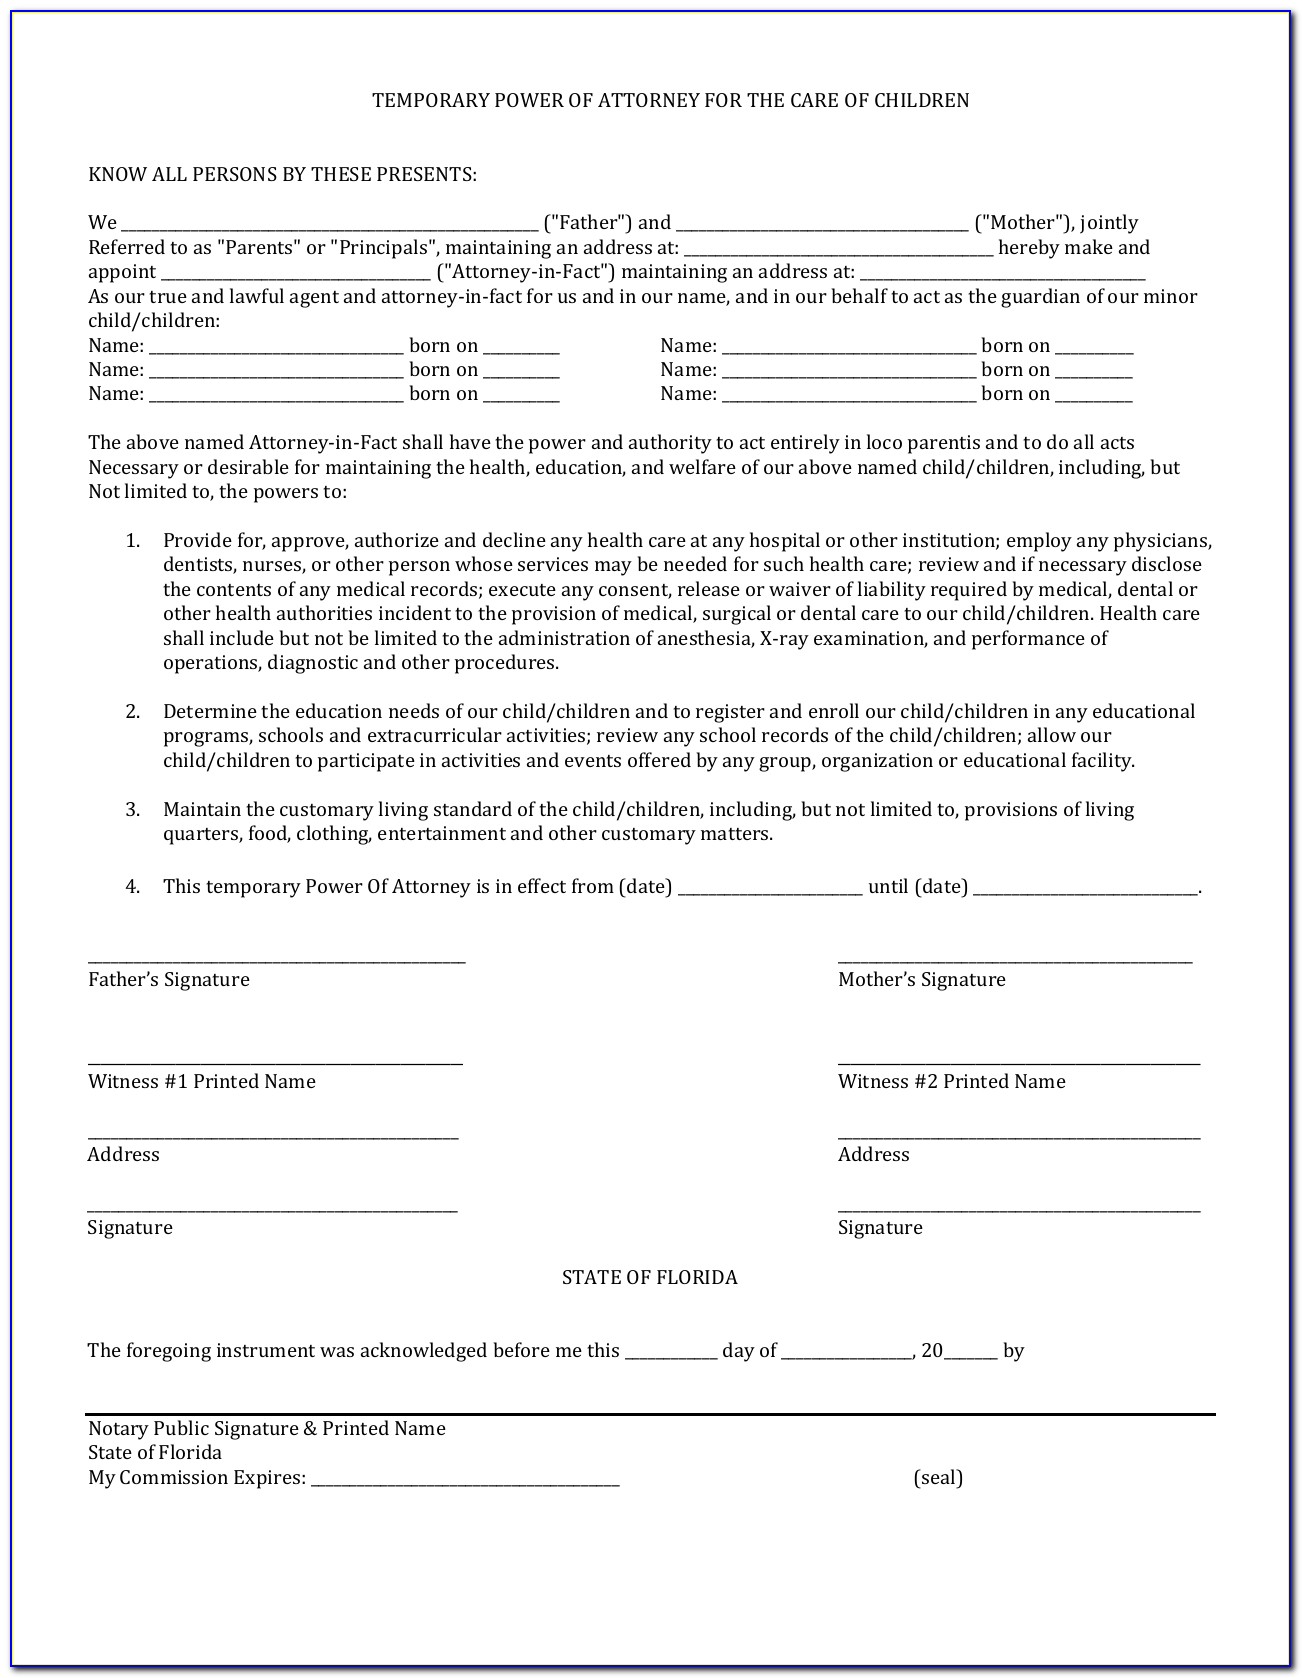 Florida Power Of Attorney Form 2015